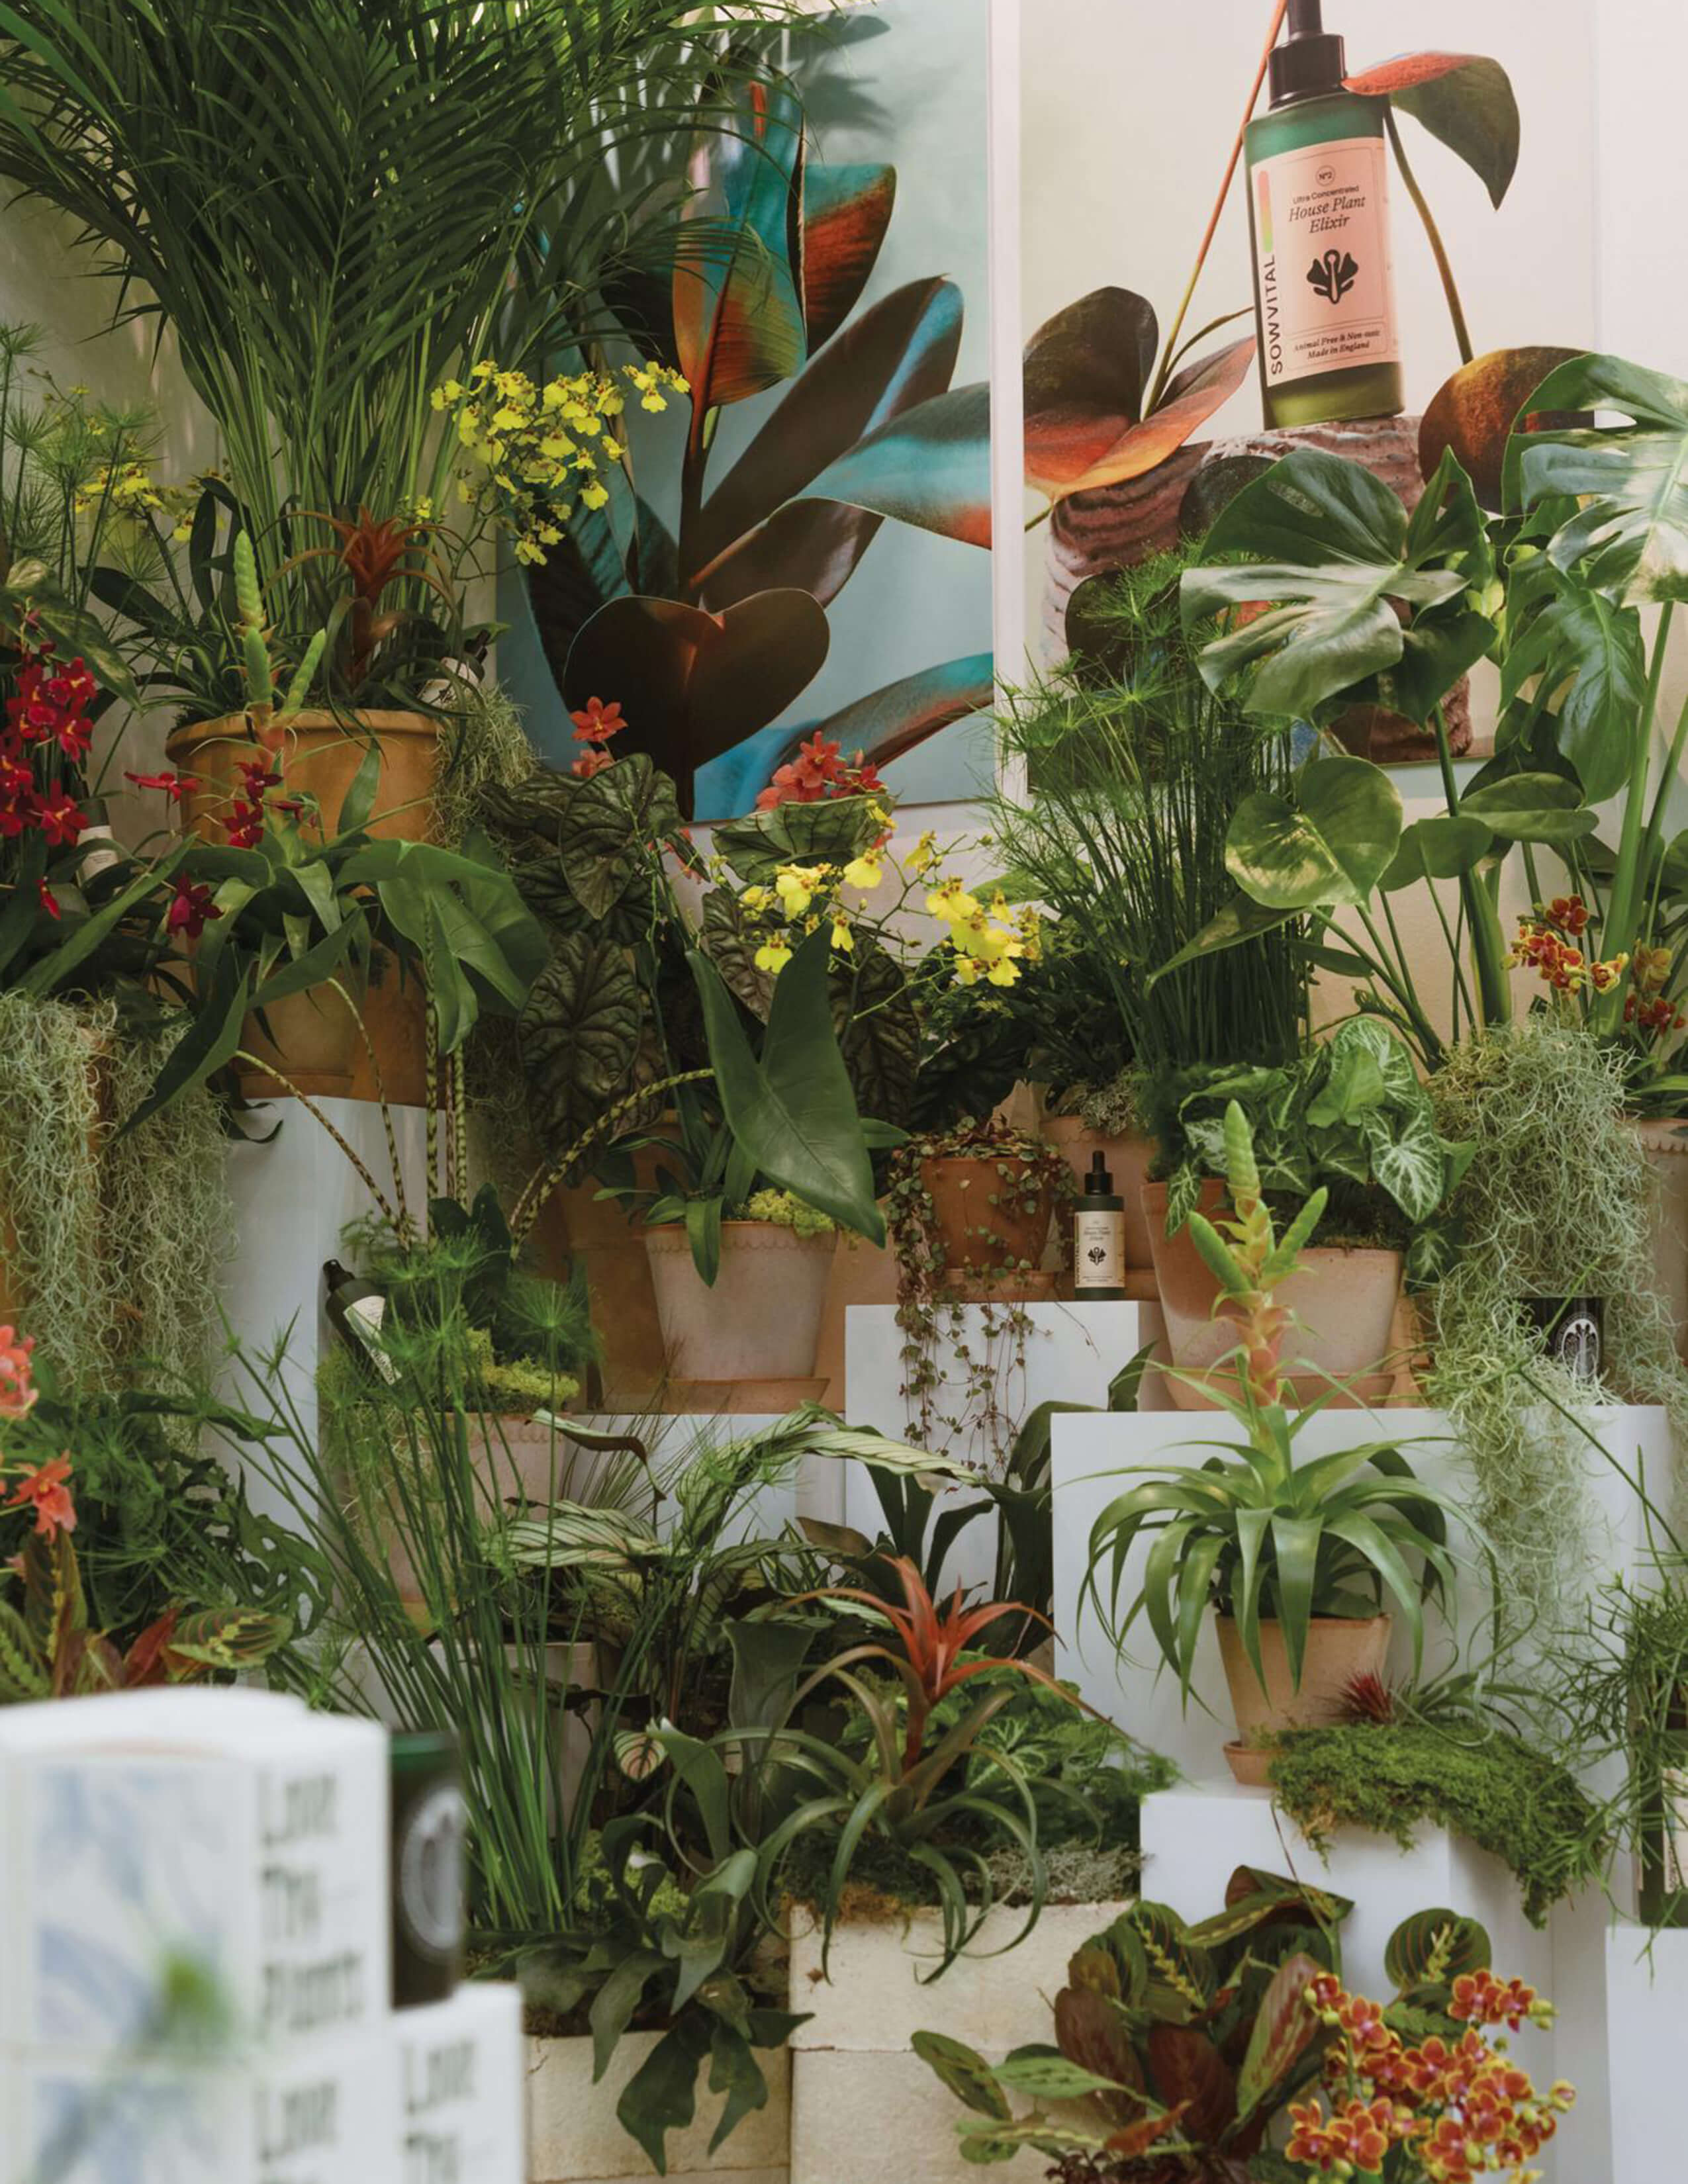 A massive collection of various potted plants and flowers were displayed with Sowvital’s house plant products and there were 2 product posters behind on the wall.